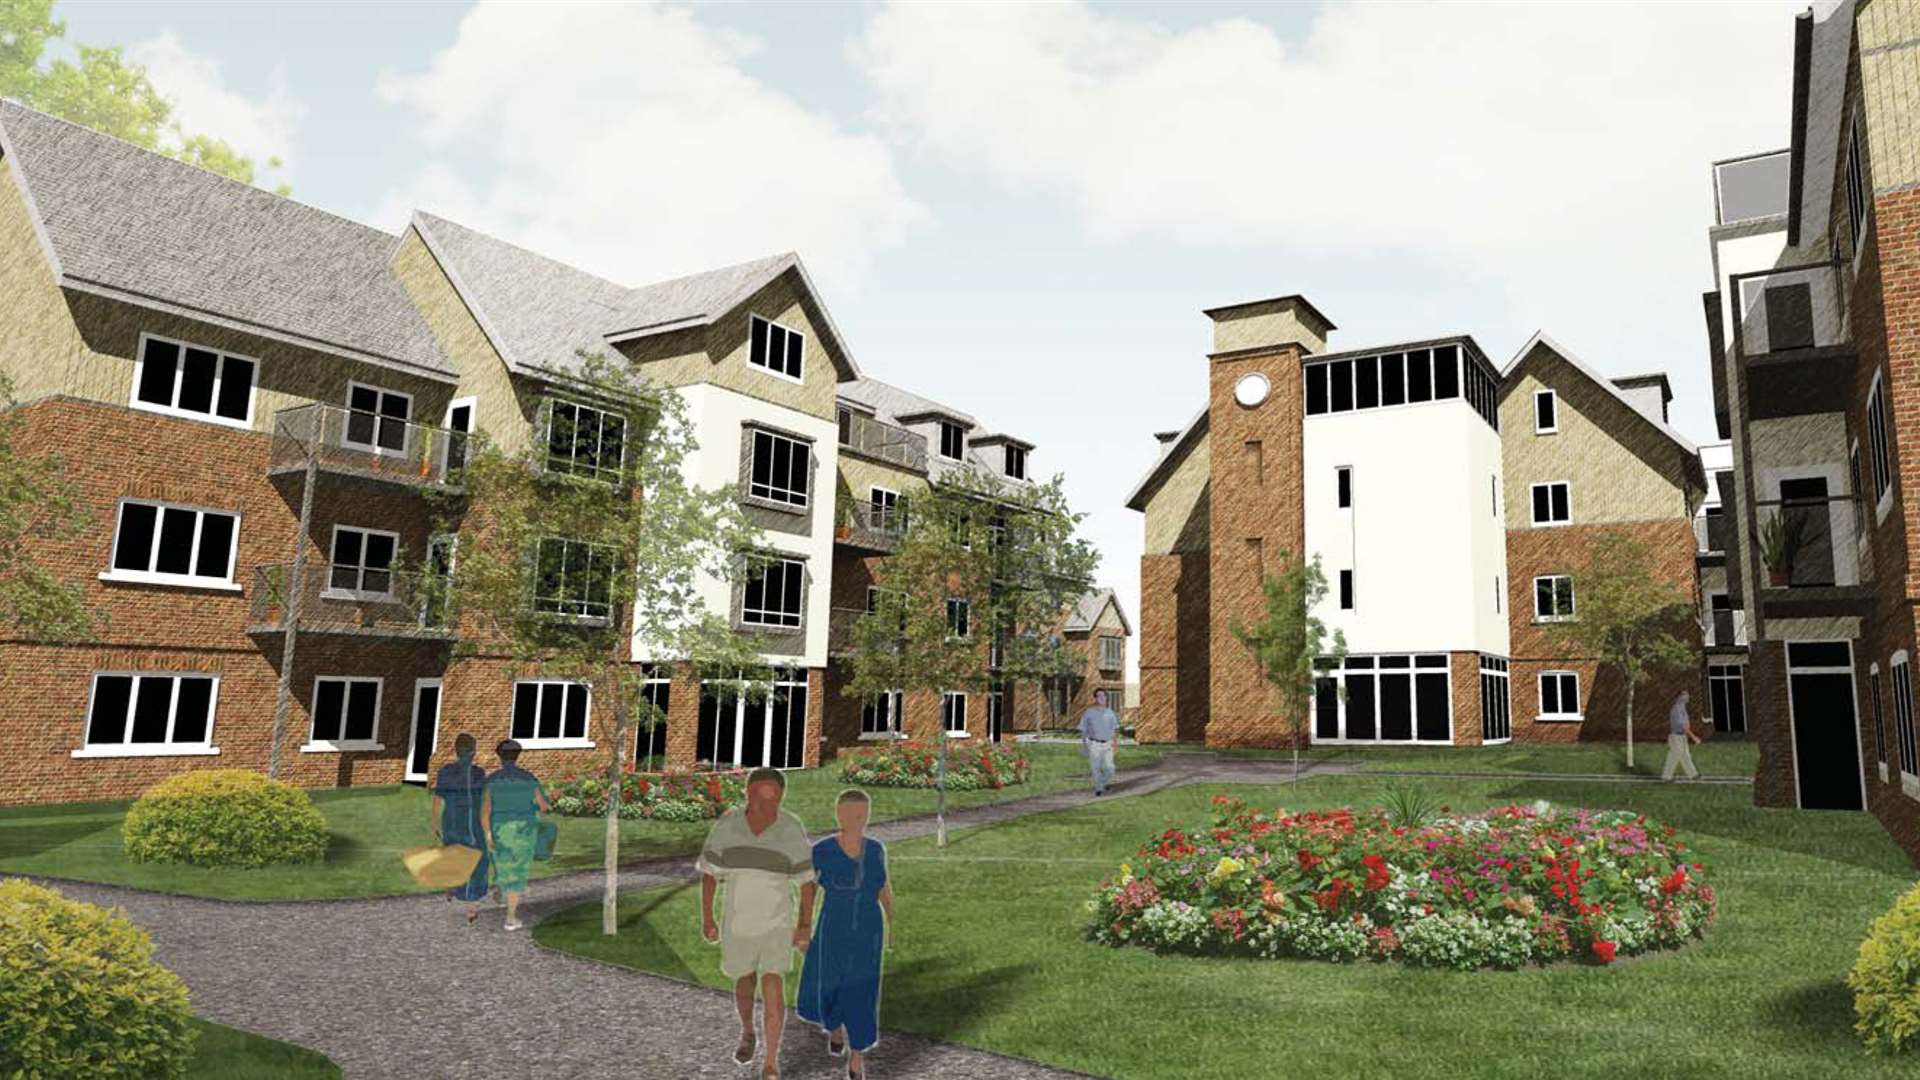 An artist's impression for how the village could look